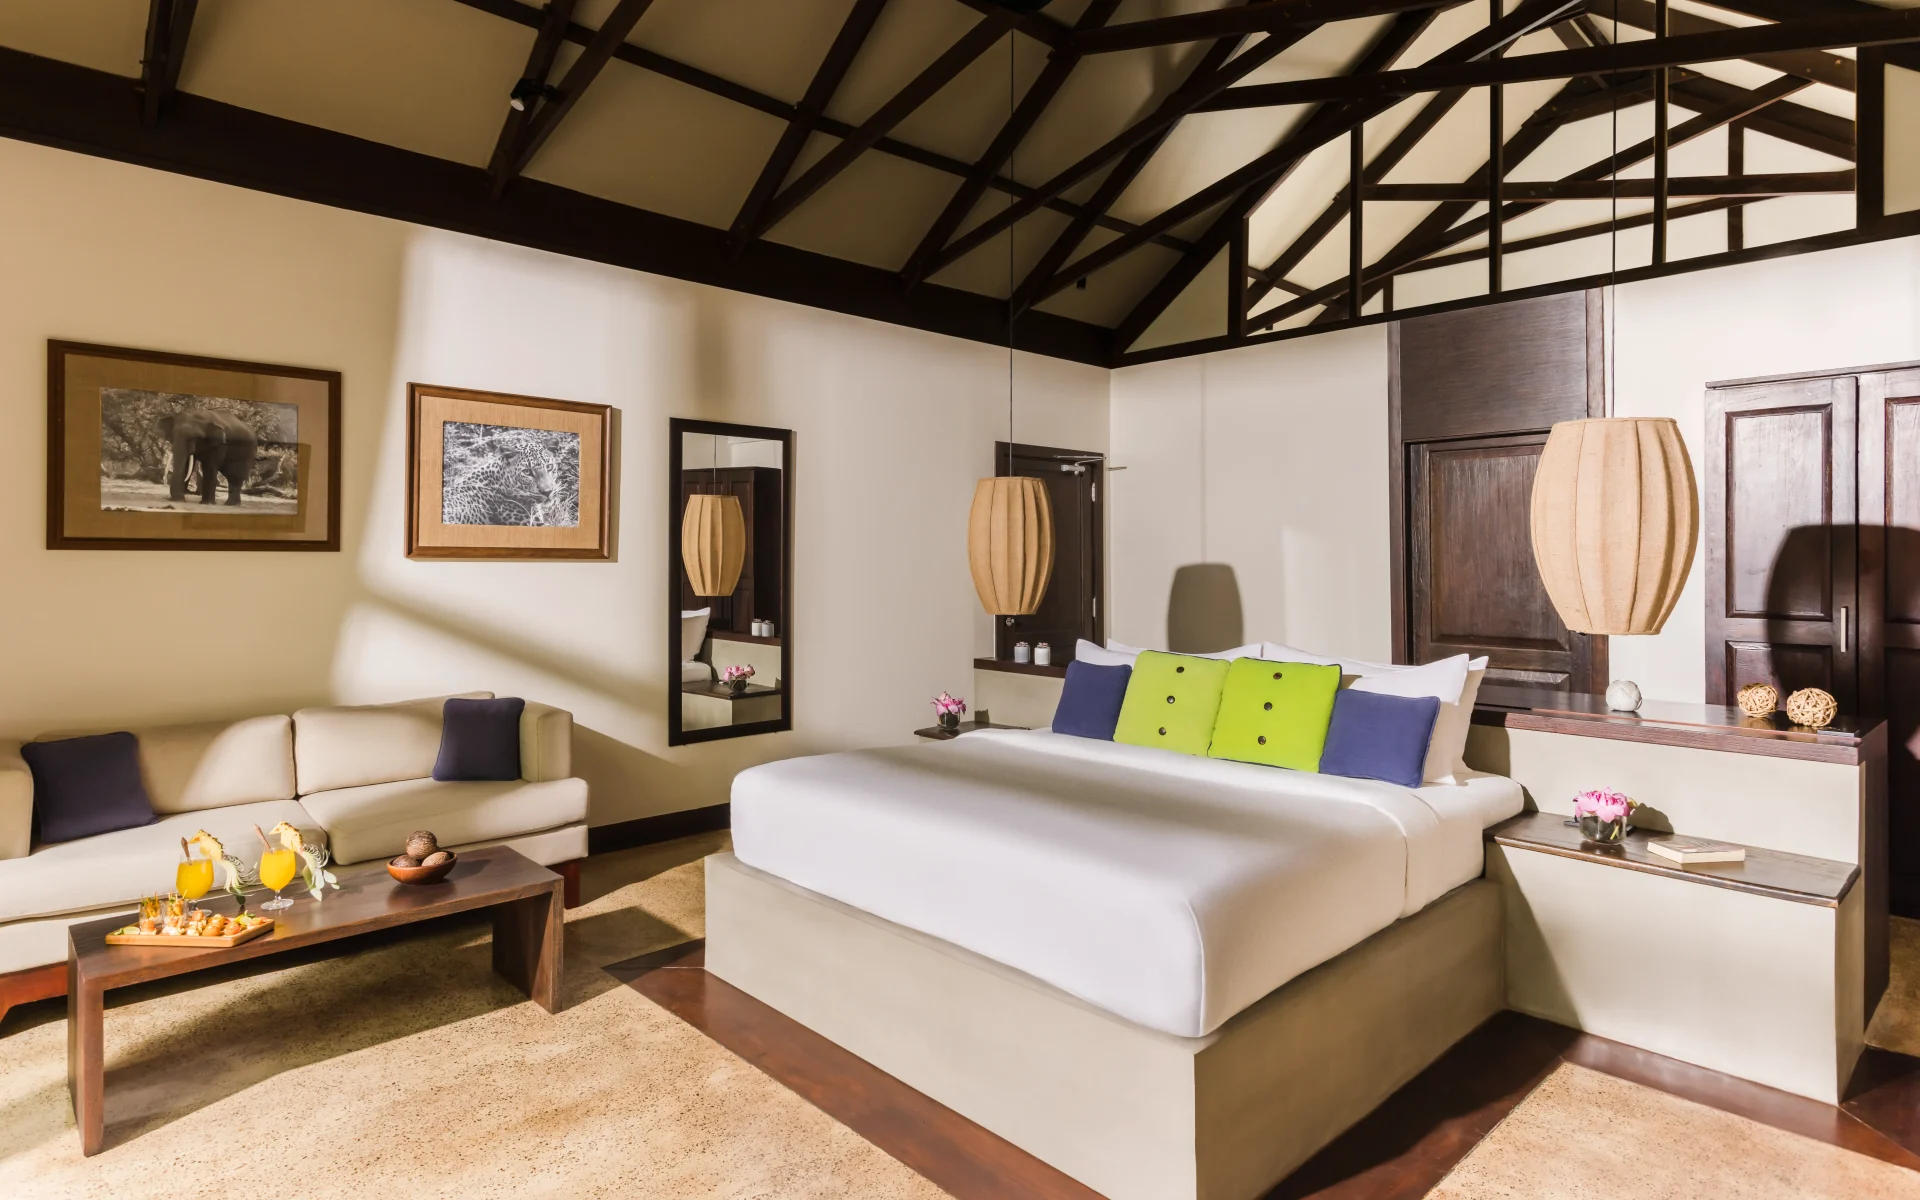 Cabin bedrooms at Jungle Beach are modern and dressed in a neutral colour palette, with high-beamed ceilings.